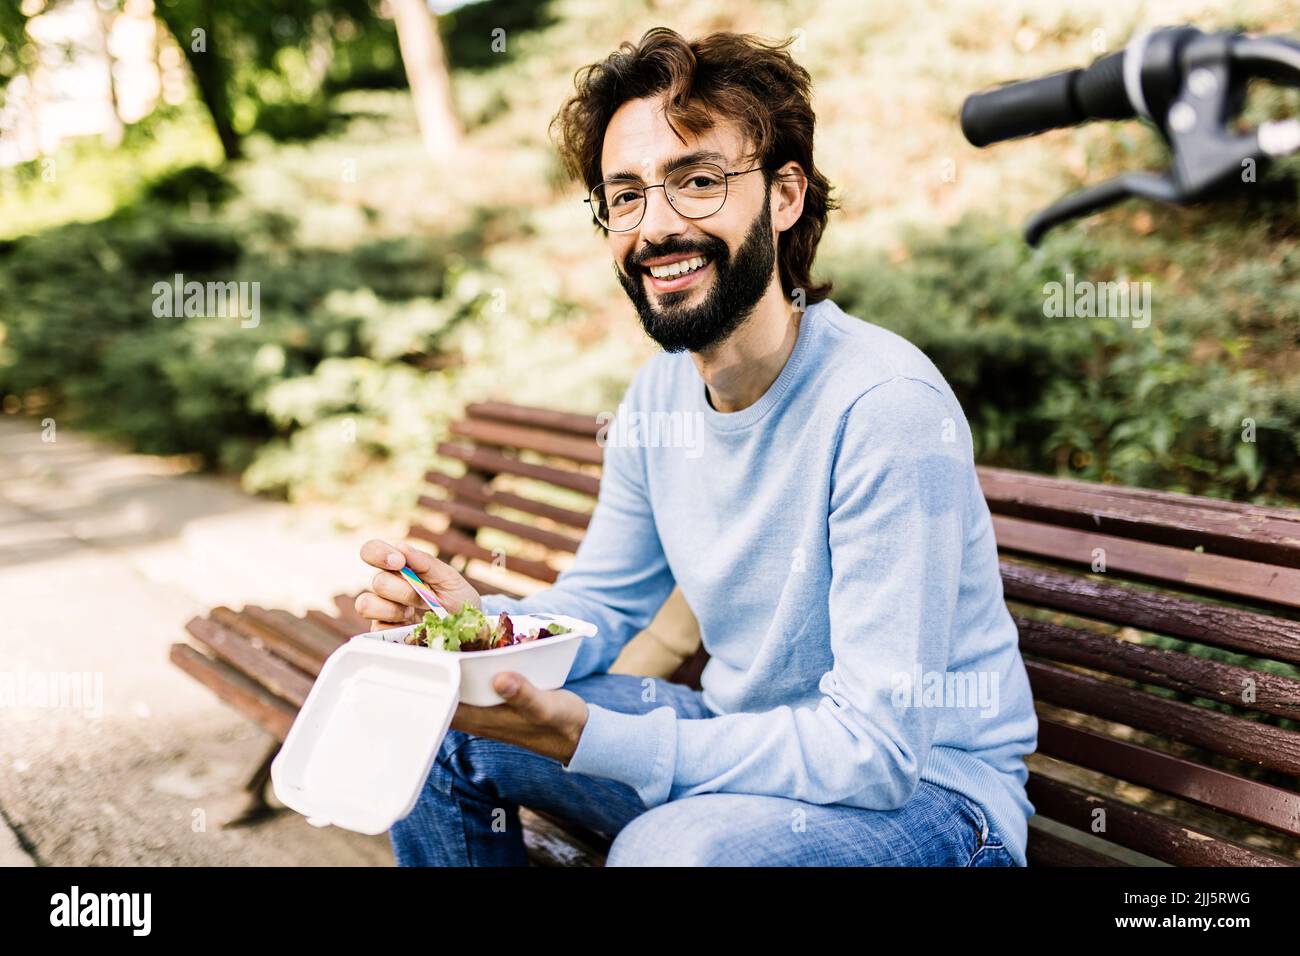 Happy man with food sitting on bench at park Stock Photo